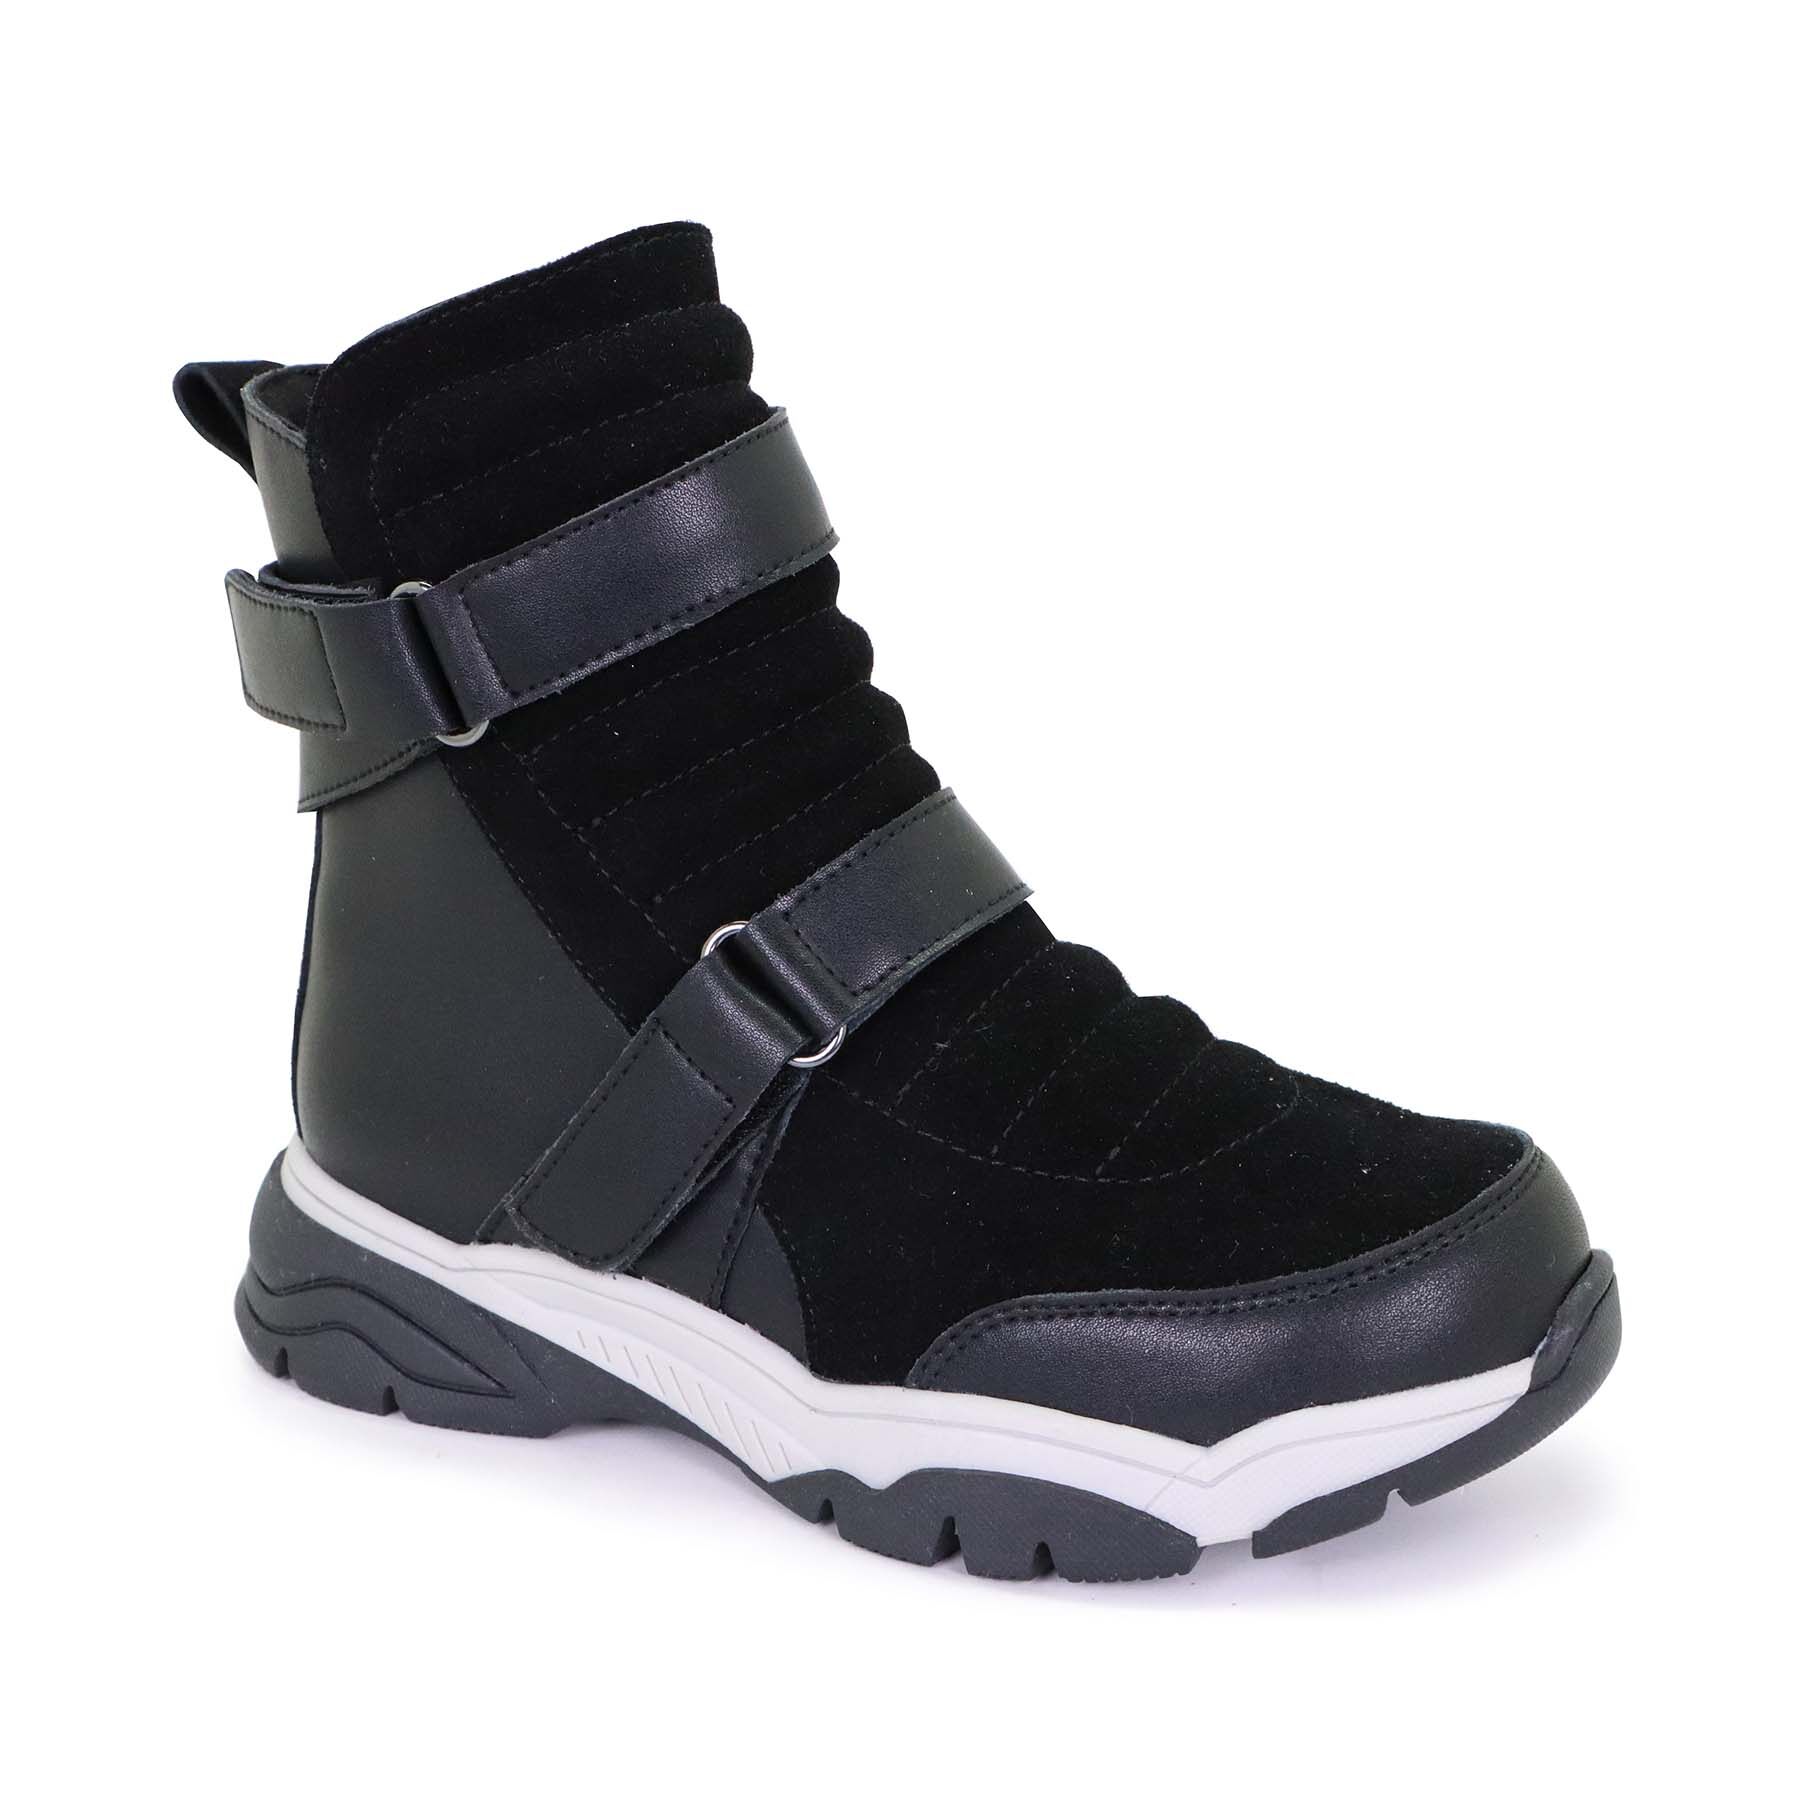 Top selling children's leather outdoor boots manufacturer direct supply